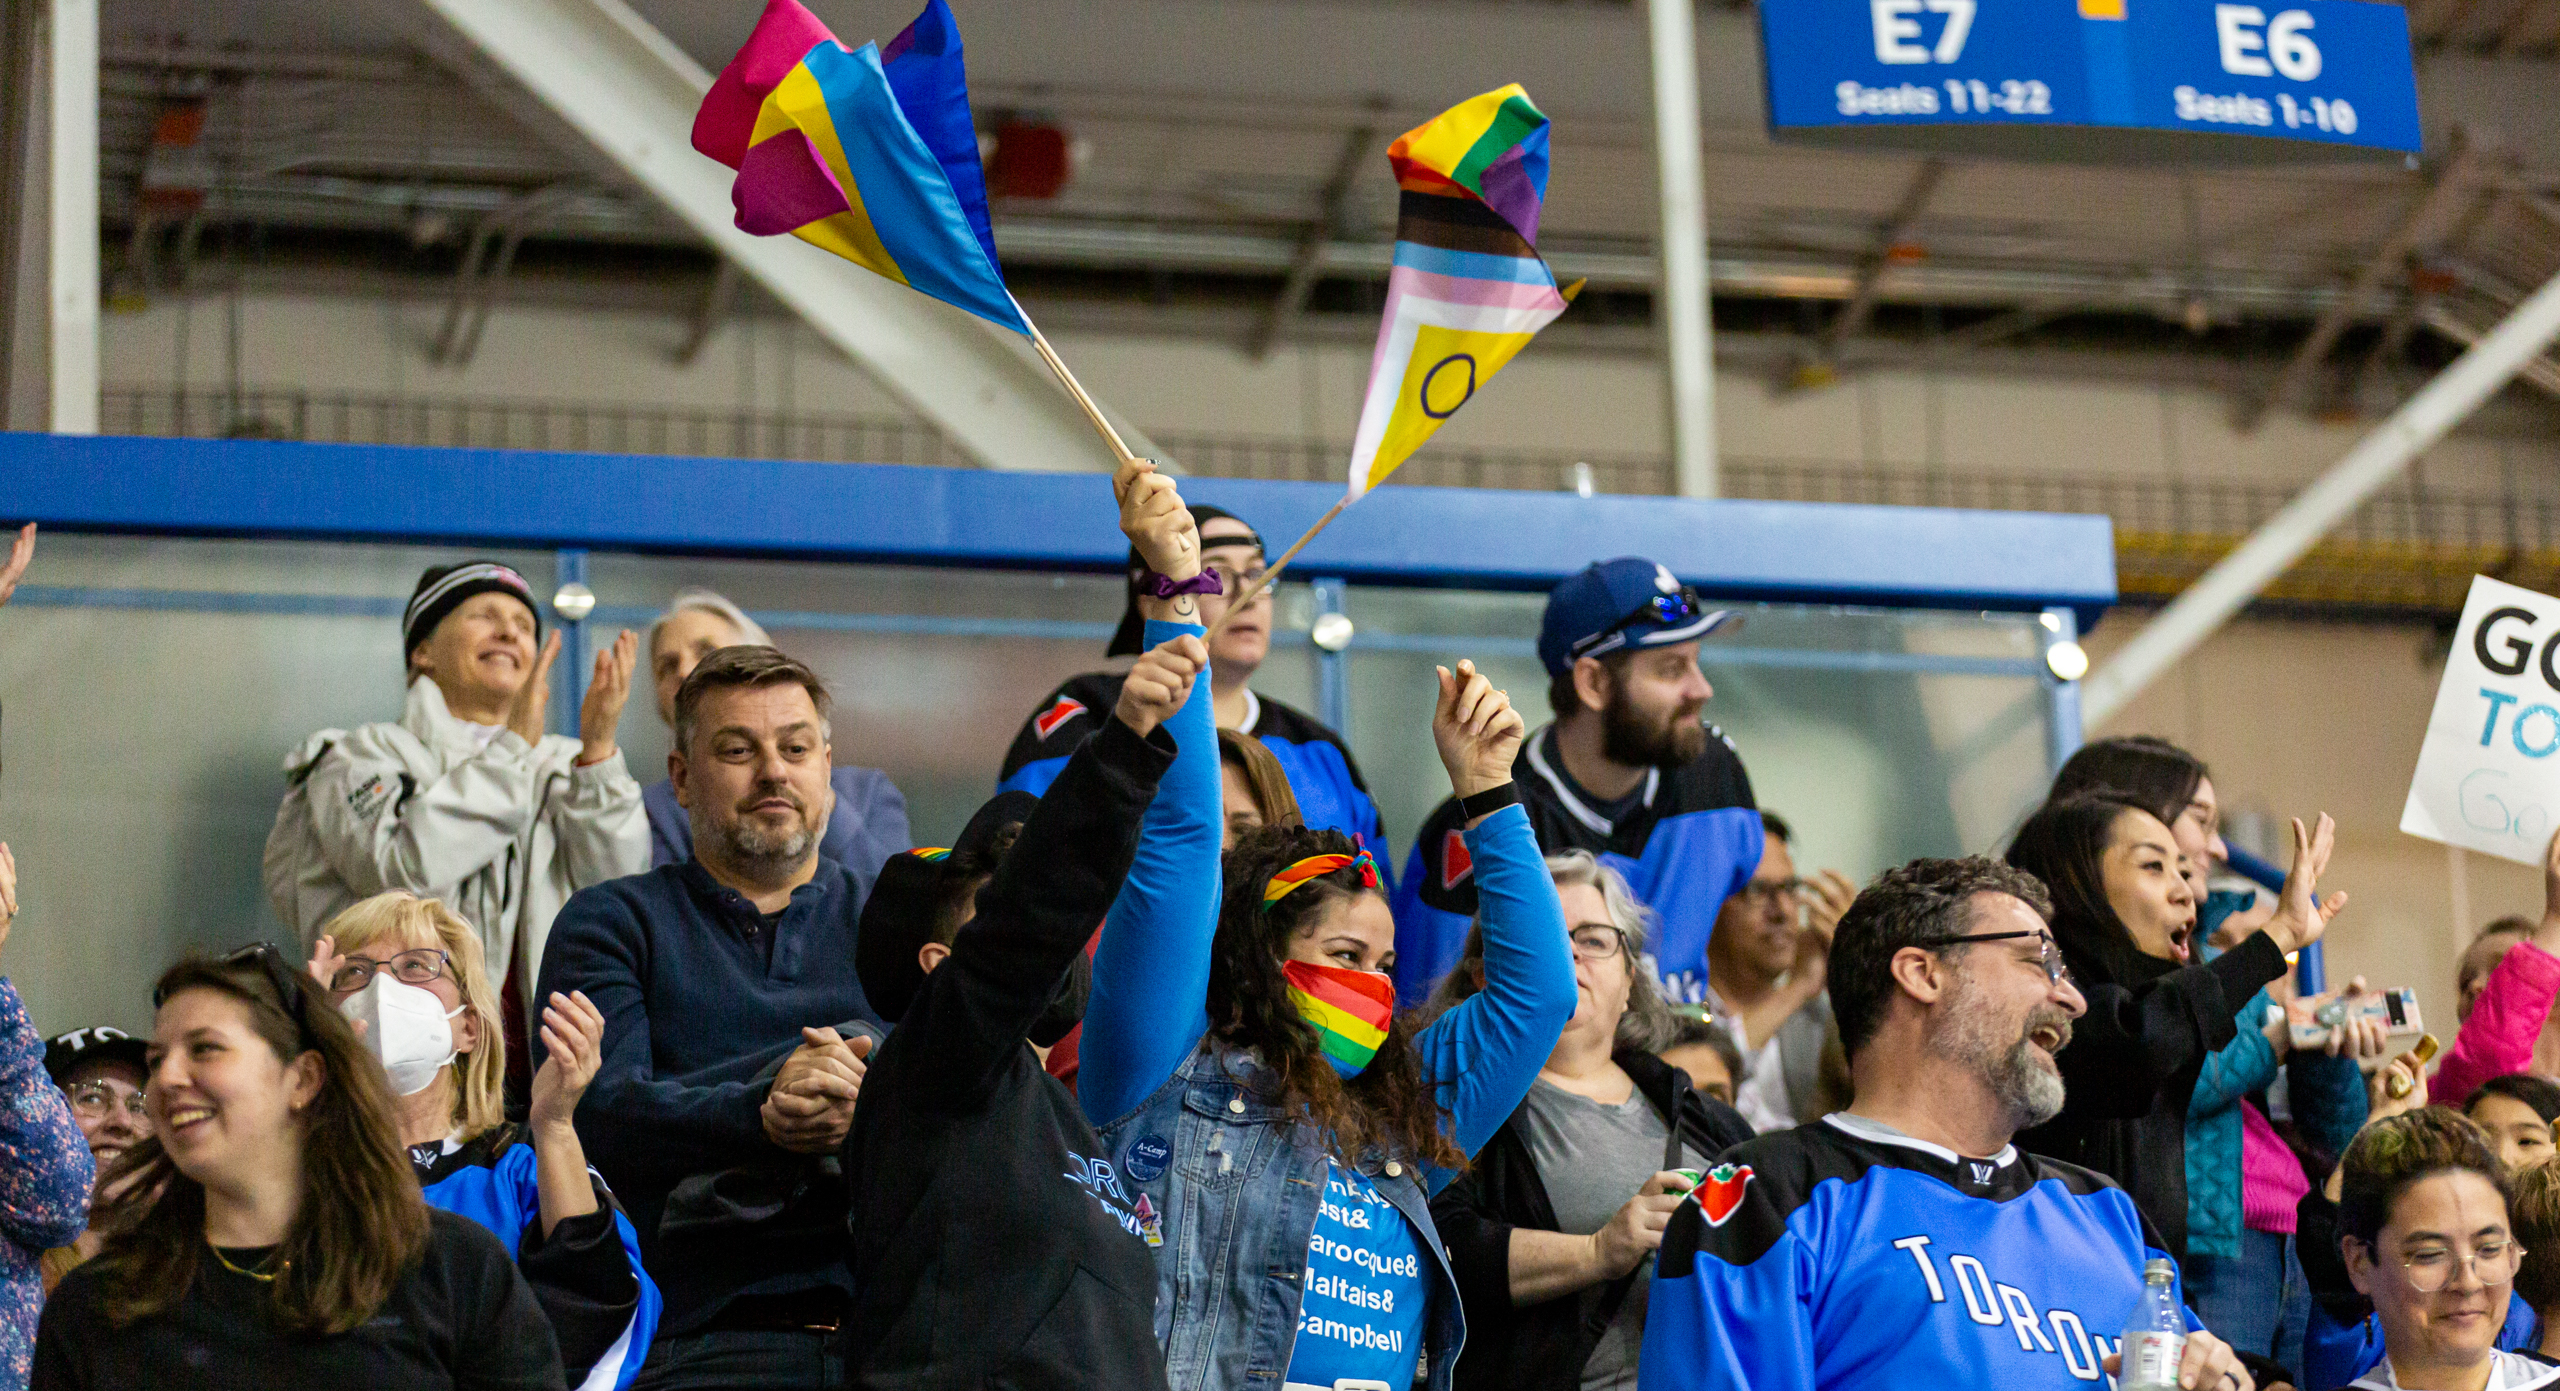 Fans in rainbow masks wave various pride flags in the air in the crowd at a PWHL Toronto game